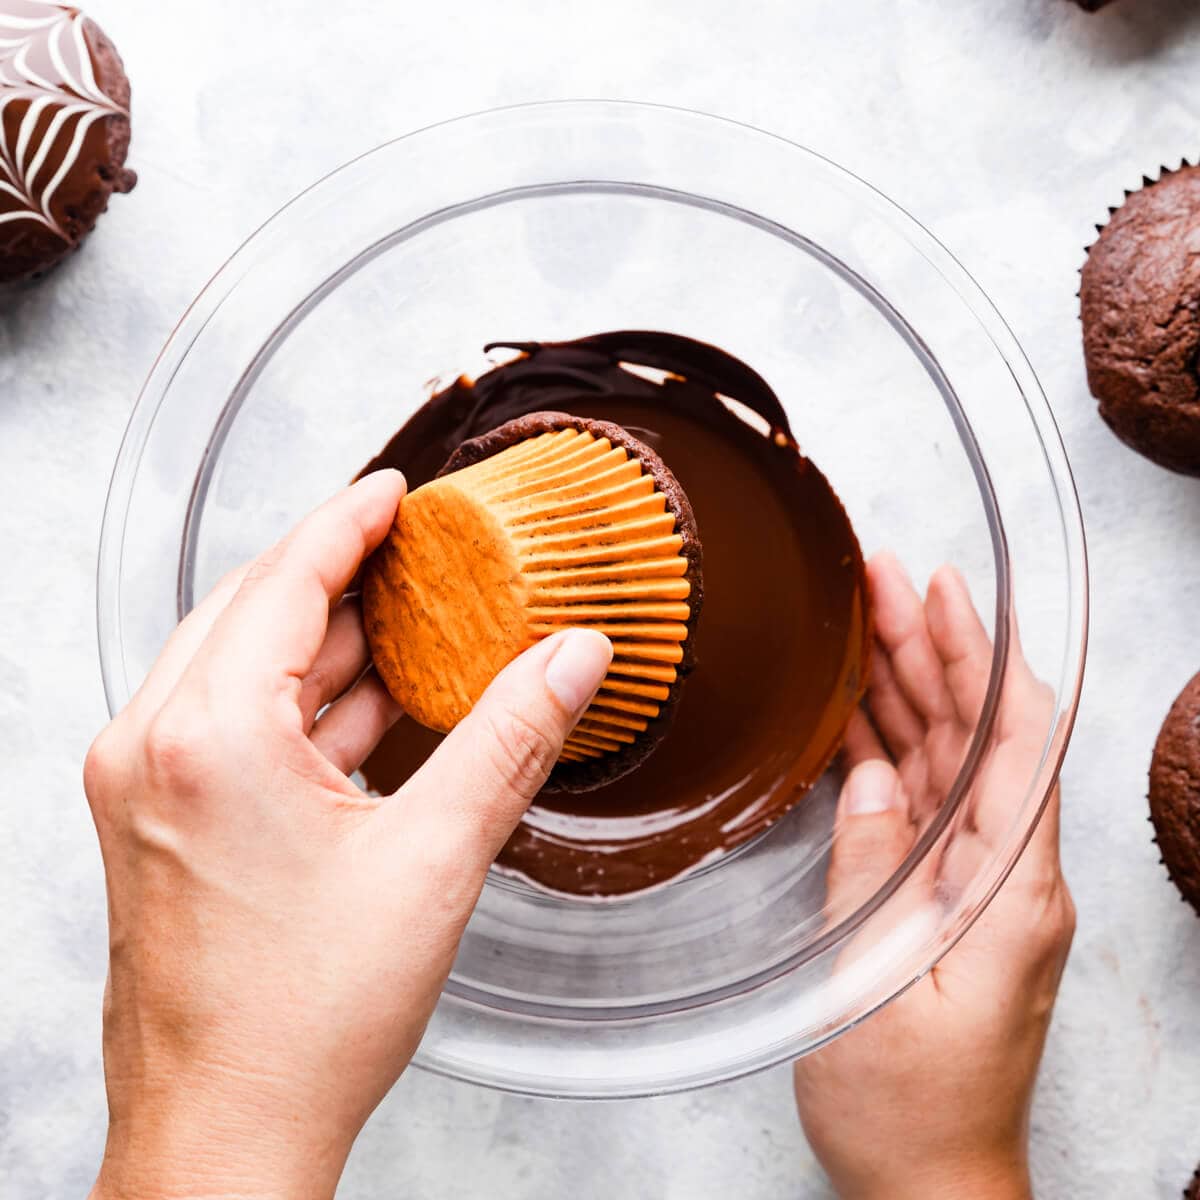 pair of hands dipping a chocolate muffin into a bowl with melted chocolate.